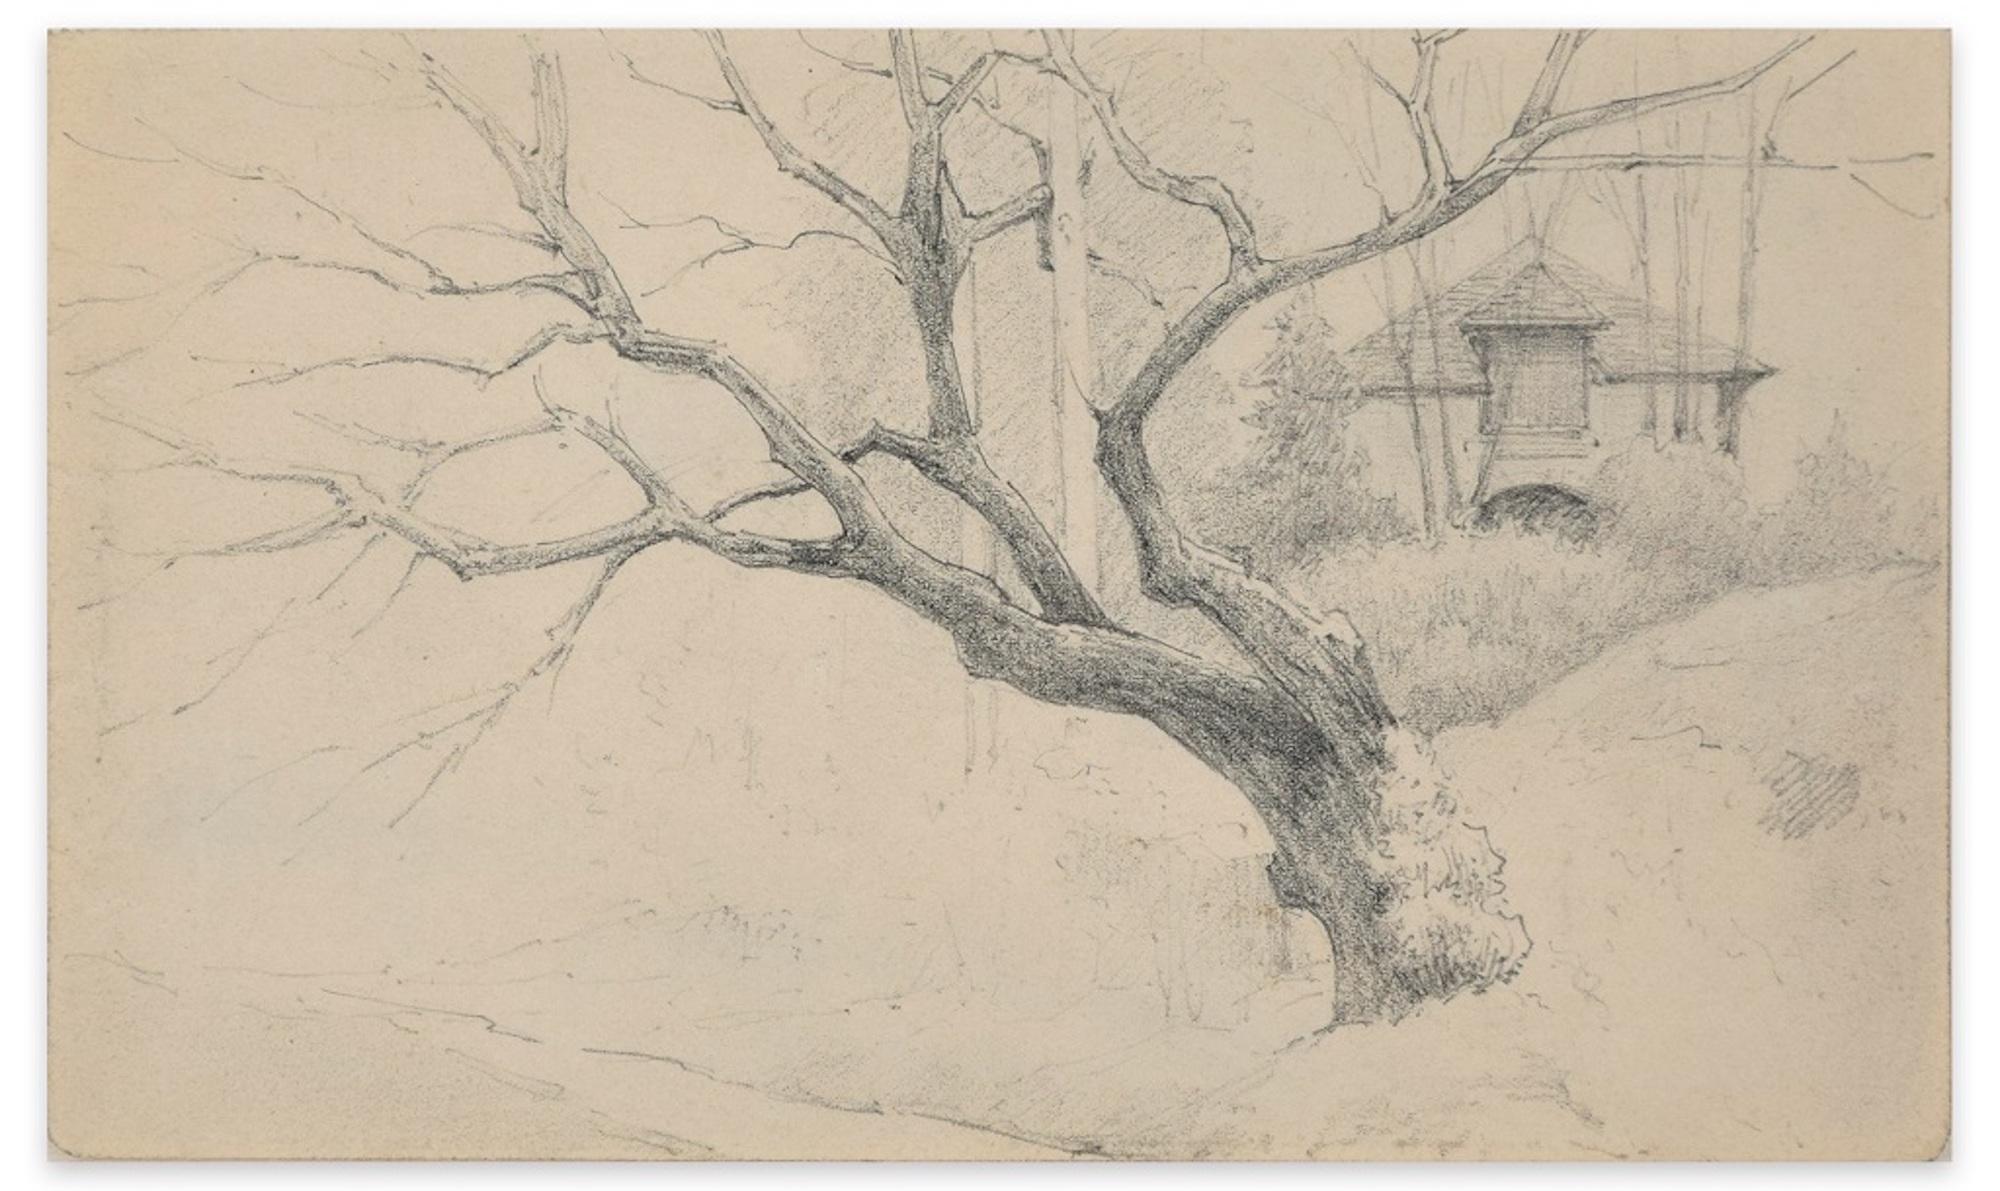 Emile-Louis Minet Landscape Art - Tree and House - Charcoal by E.-L. Minet - Early 1900